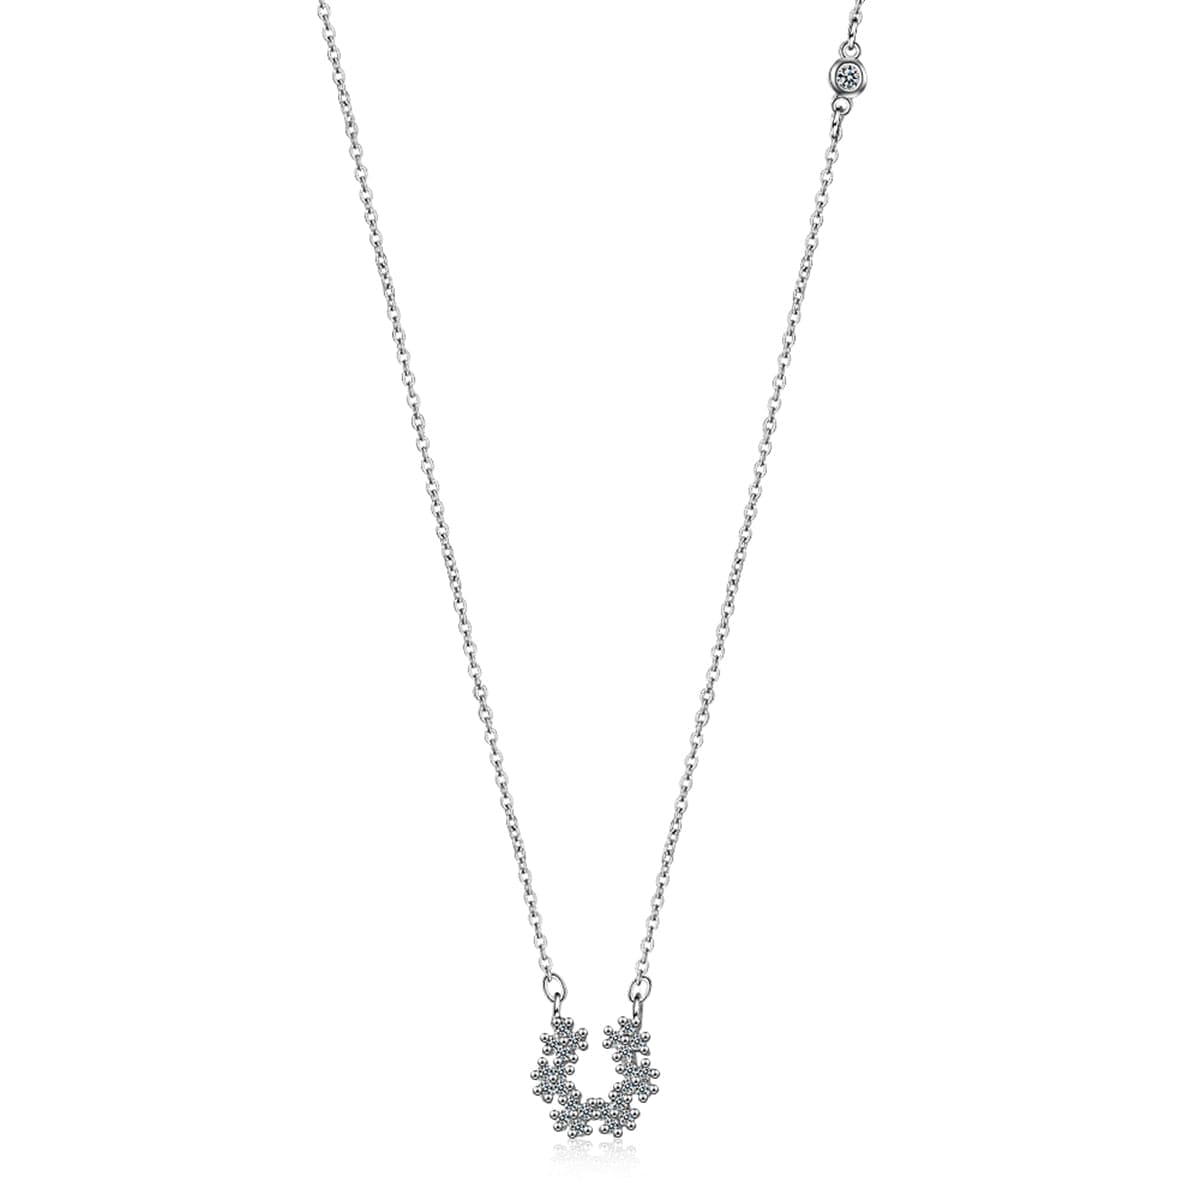 Cubic Zirconia & Silver-Plated Linking Flower Pendant Necklace